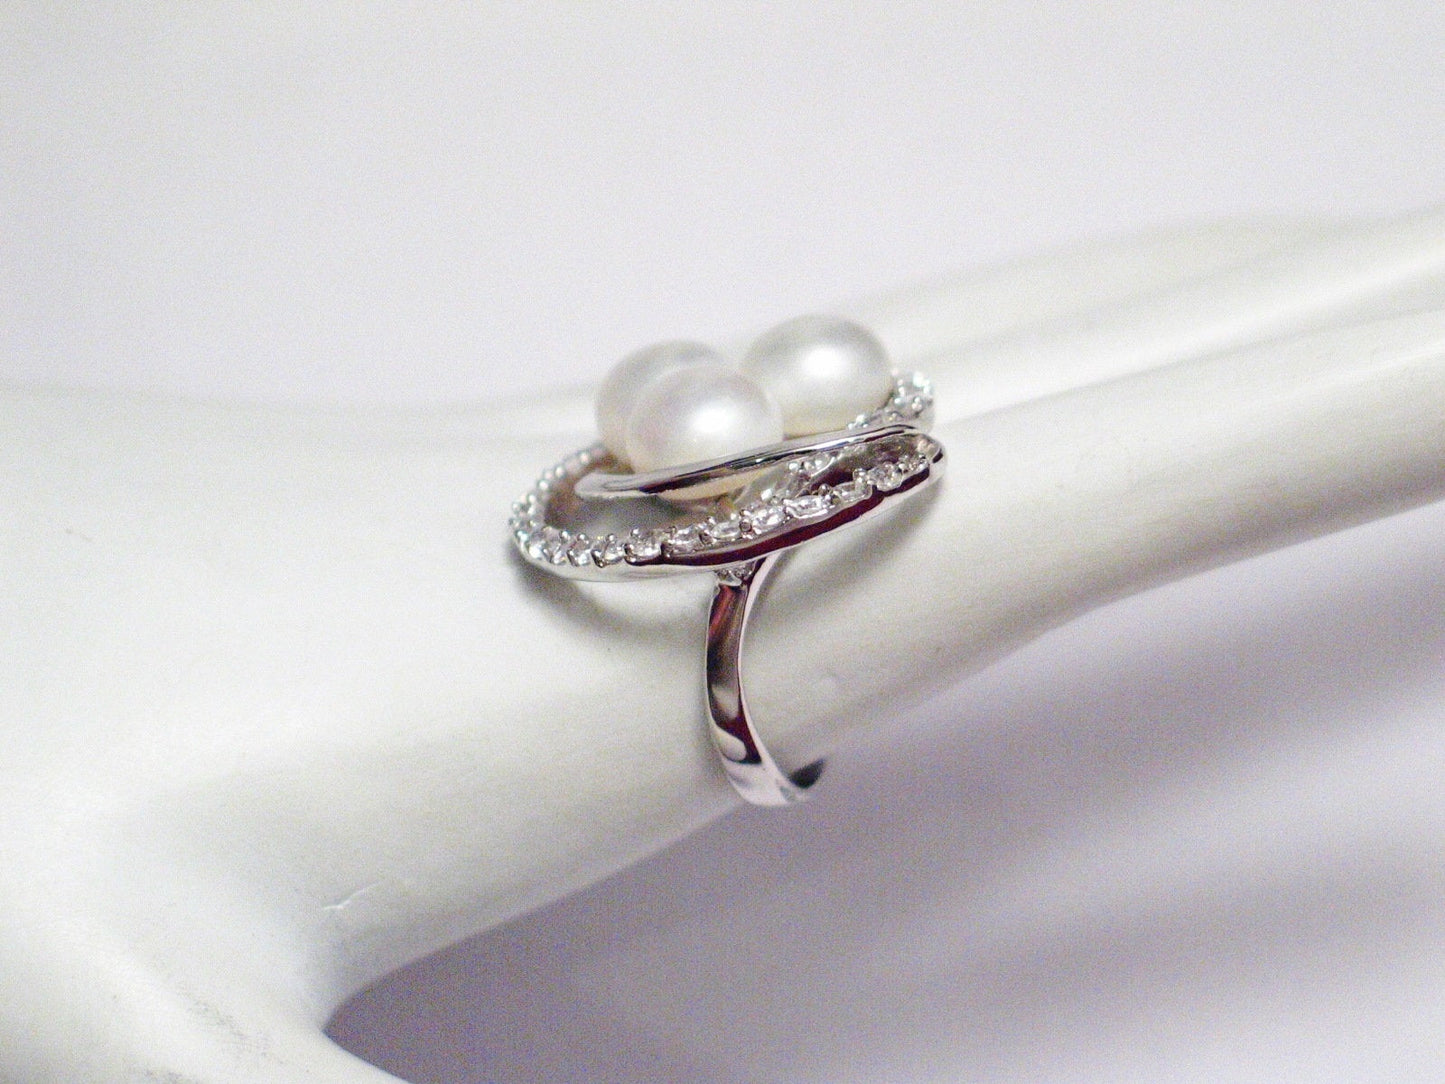 Big Ring, Woman's White Pearl Glittery Cz Stone Wide Spiral Halo Design Cocktail Statement Ring